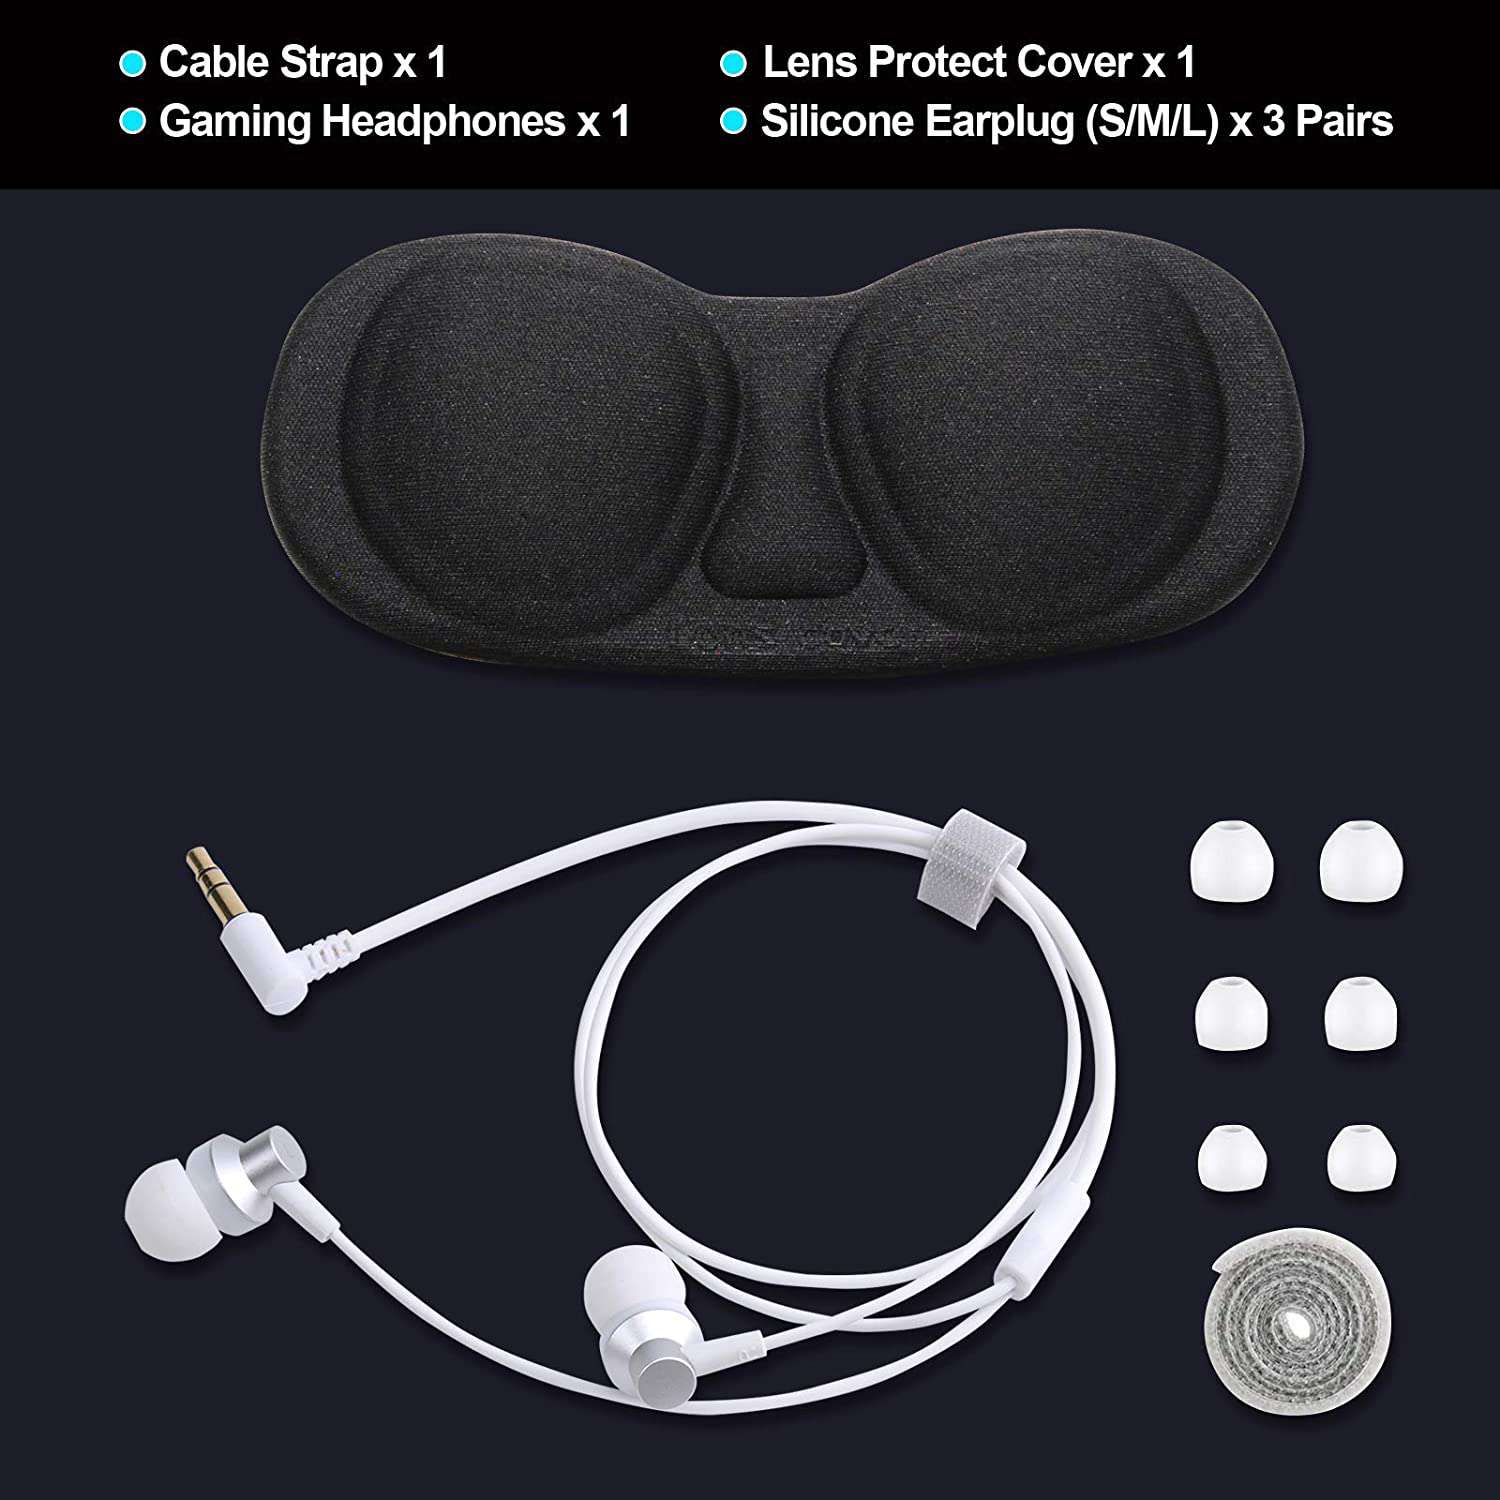 Purchase our product and receive a headset, 3 pairs of ear tips, a Velcro strap, a face mask, and a VR eye cushion